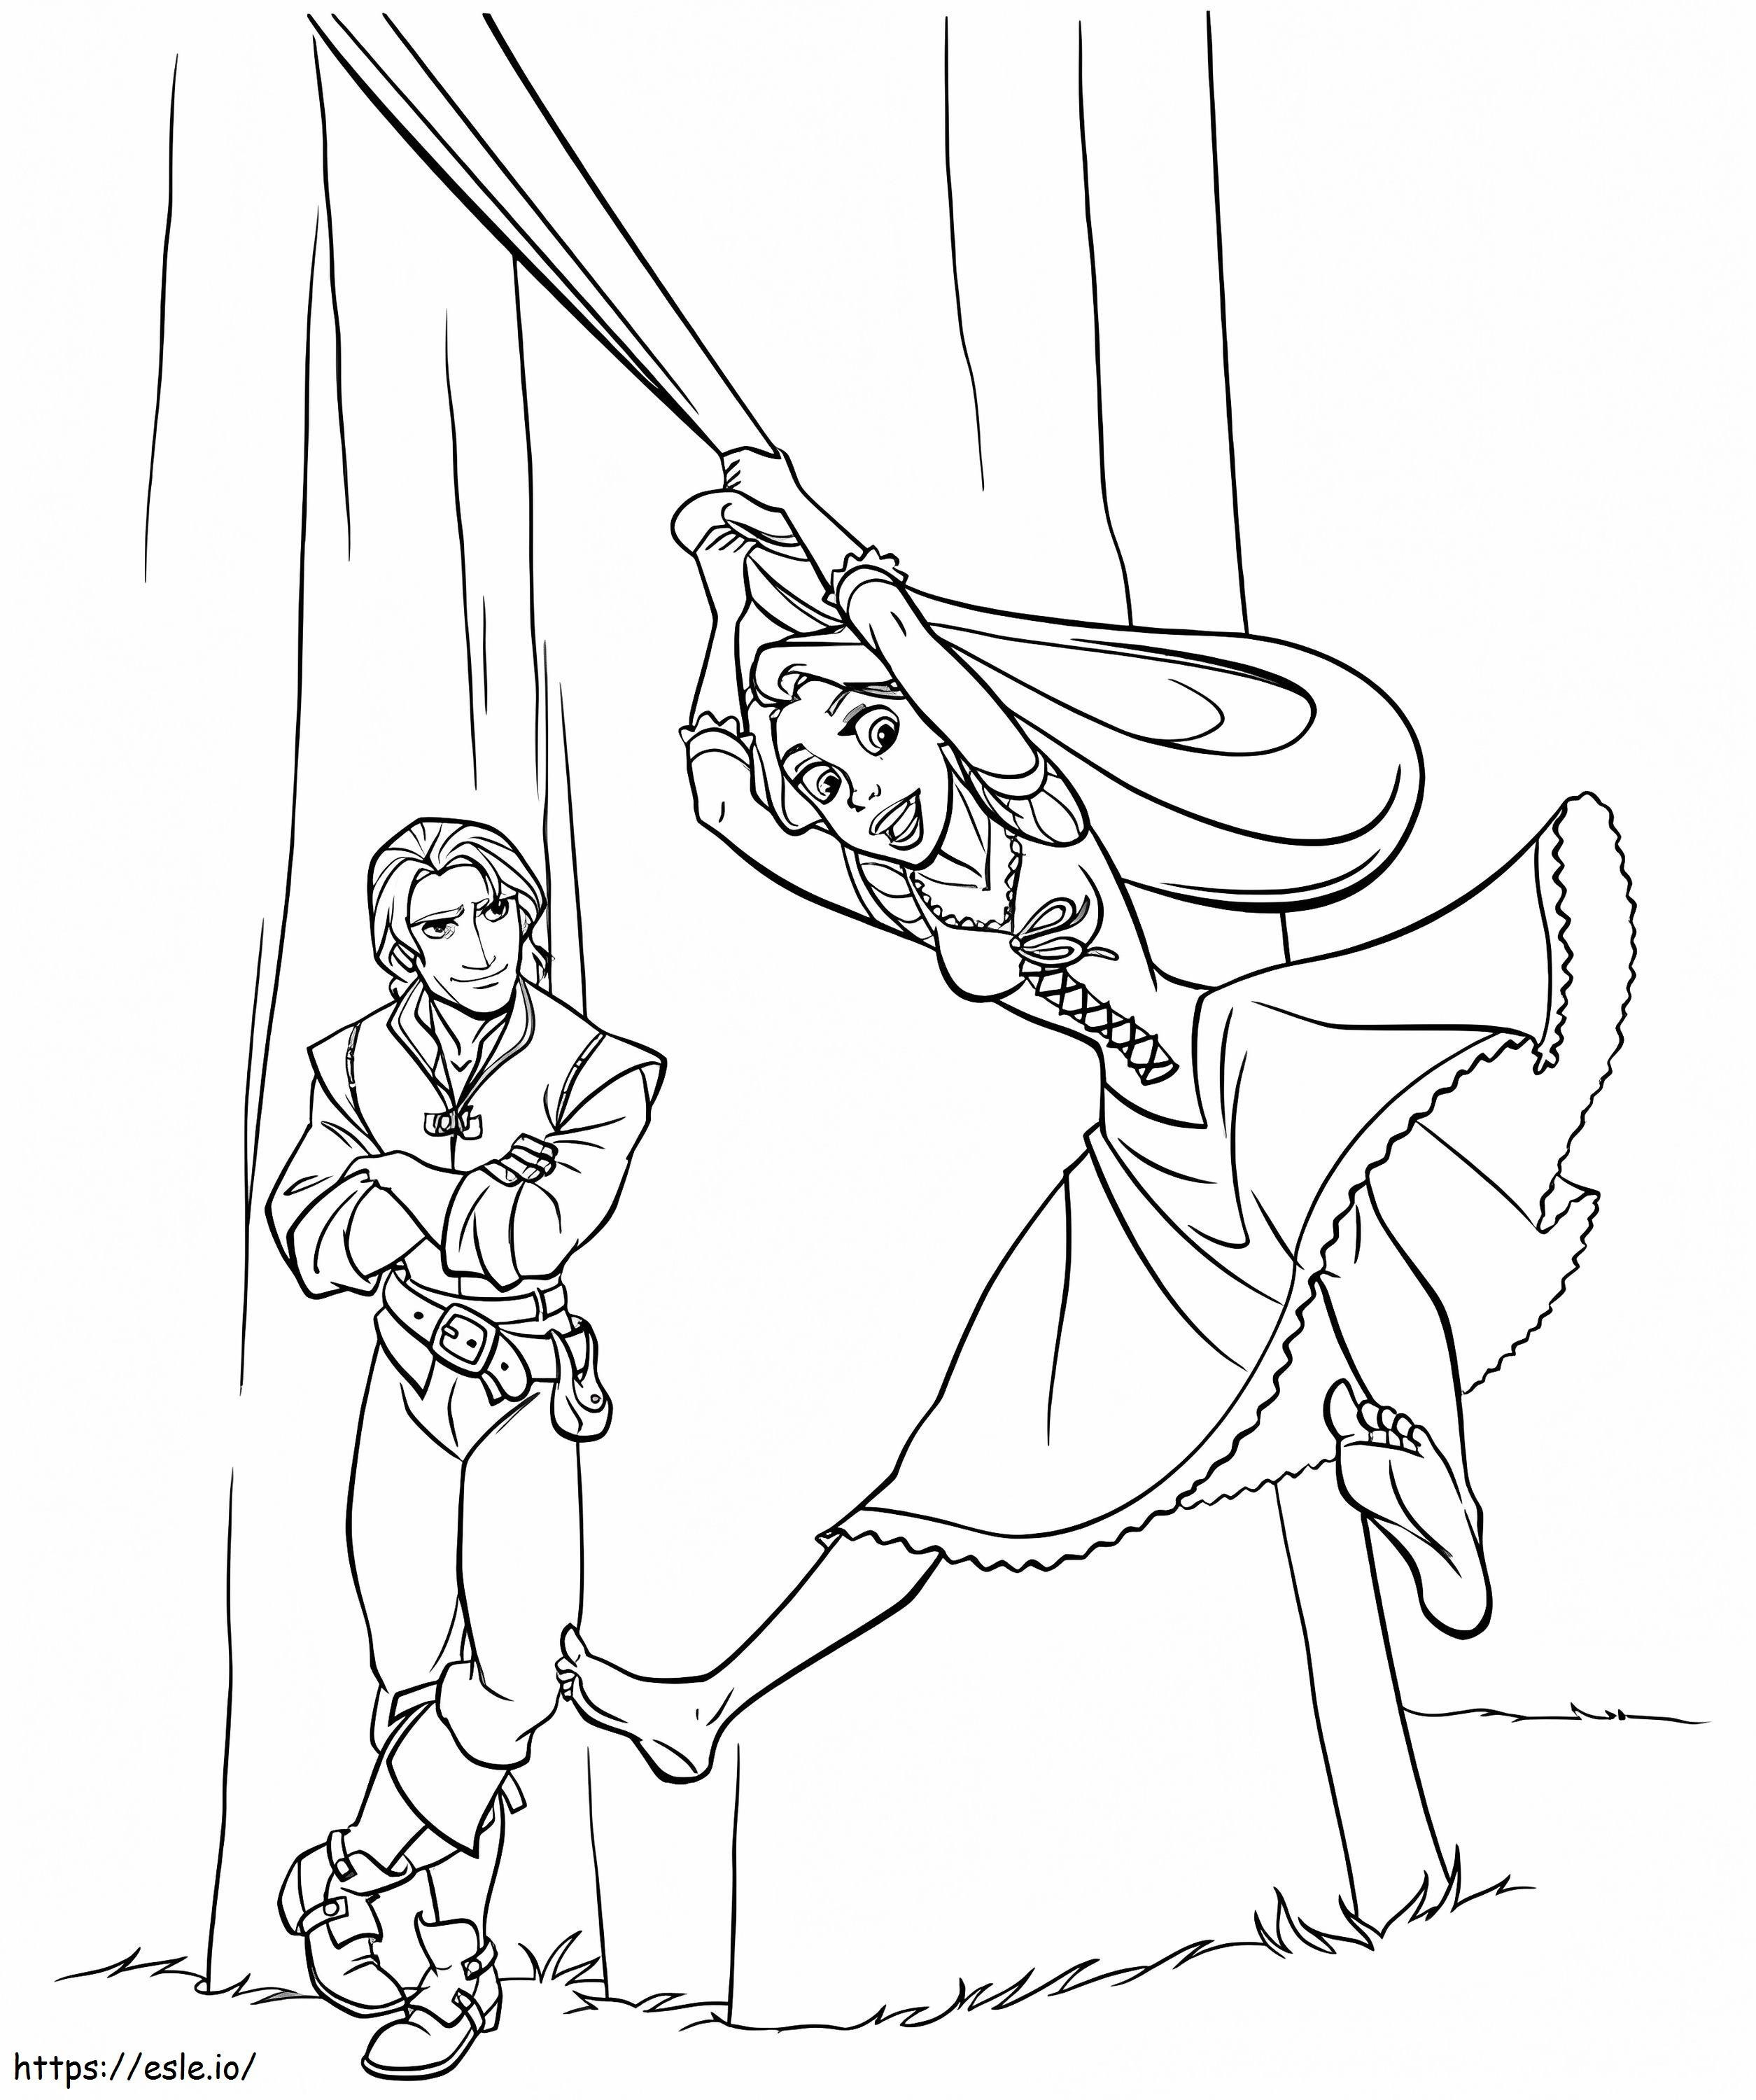 Basic Rapunzel And Flynn coloring page